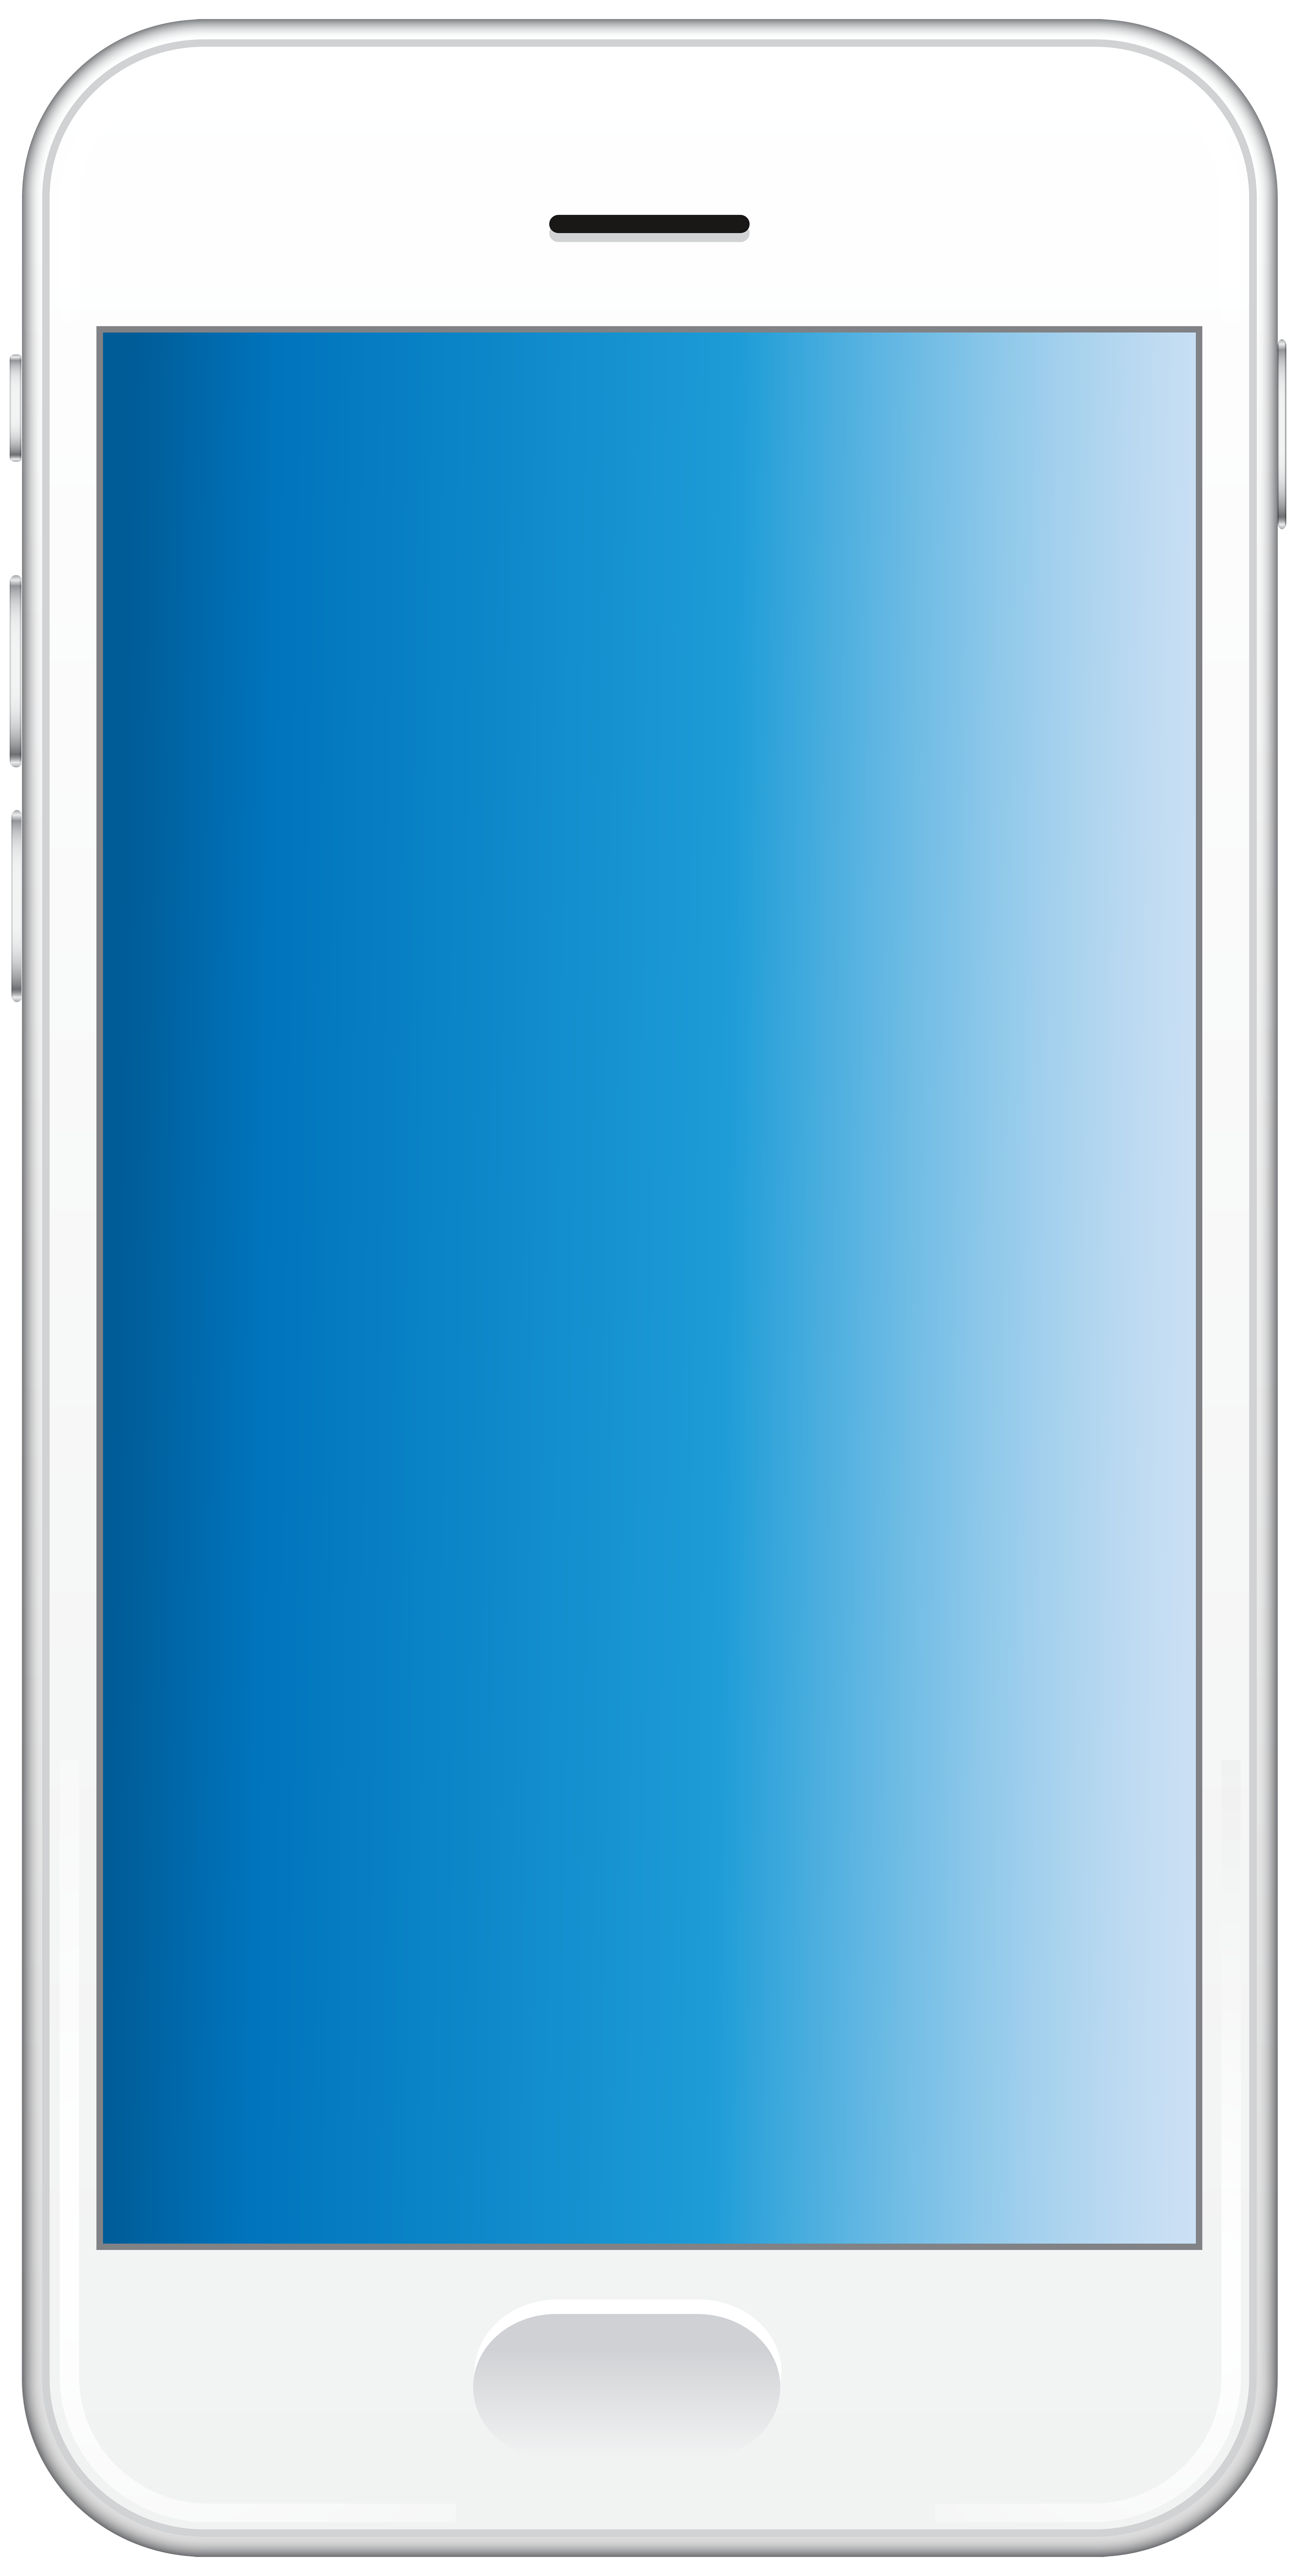 White Smartphone PNG Clip Art Image.